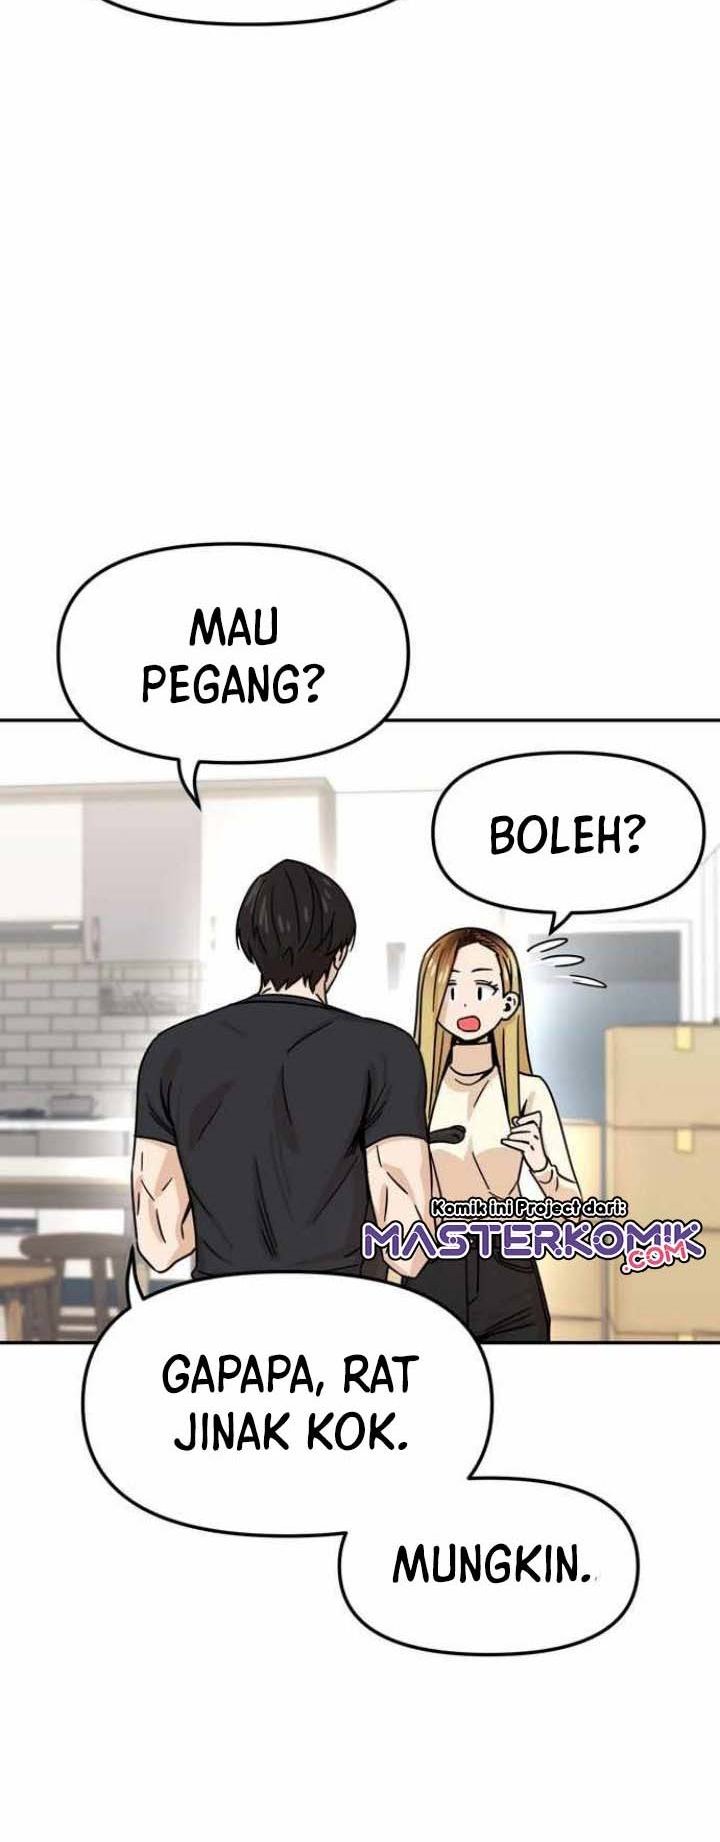 Match Made in Heaven by Chance Chapter 04